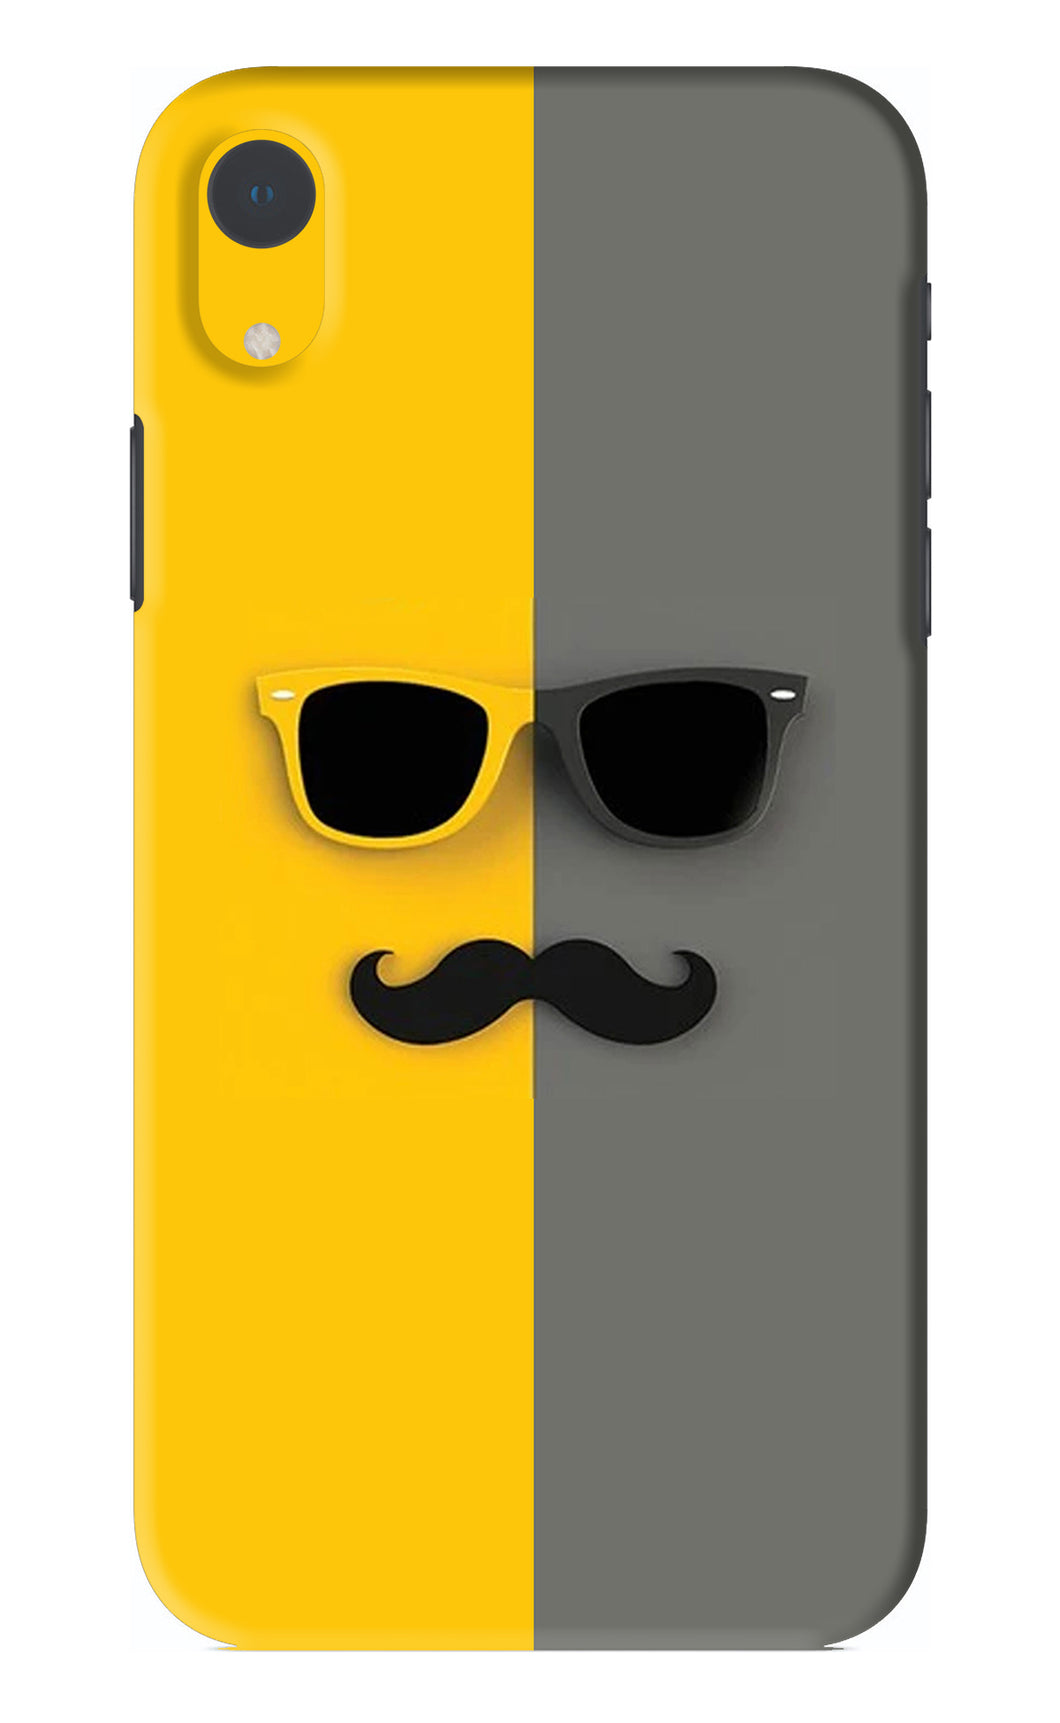 Sunglasses with Mustache iPhone XR Back Skin Wrap